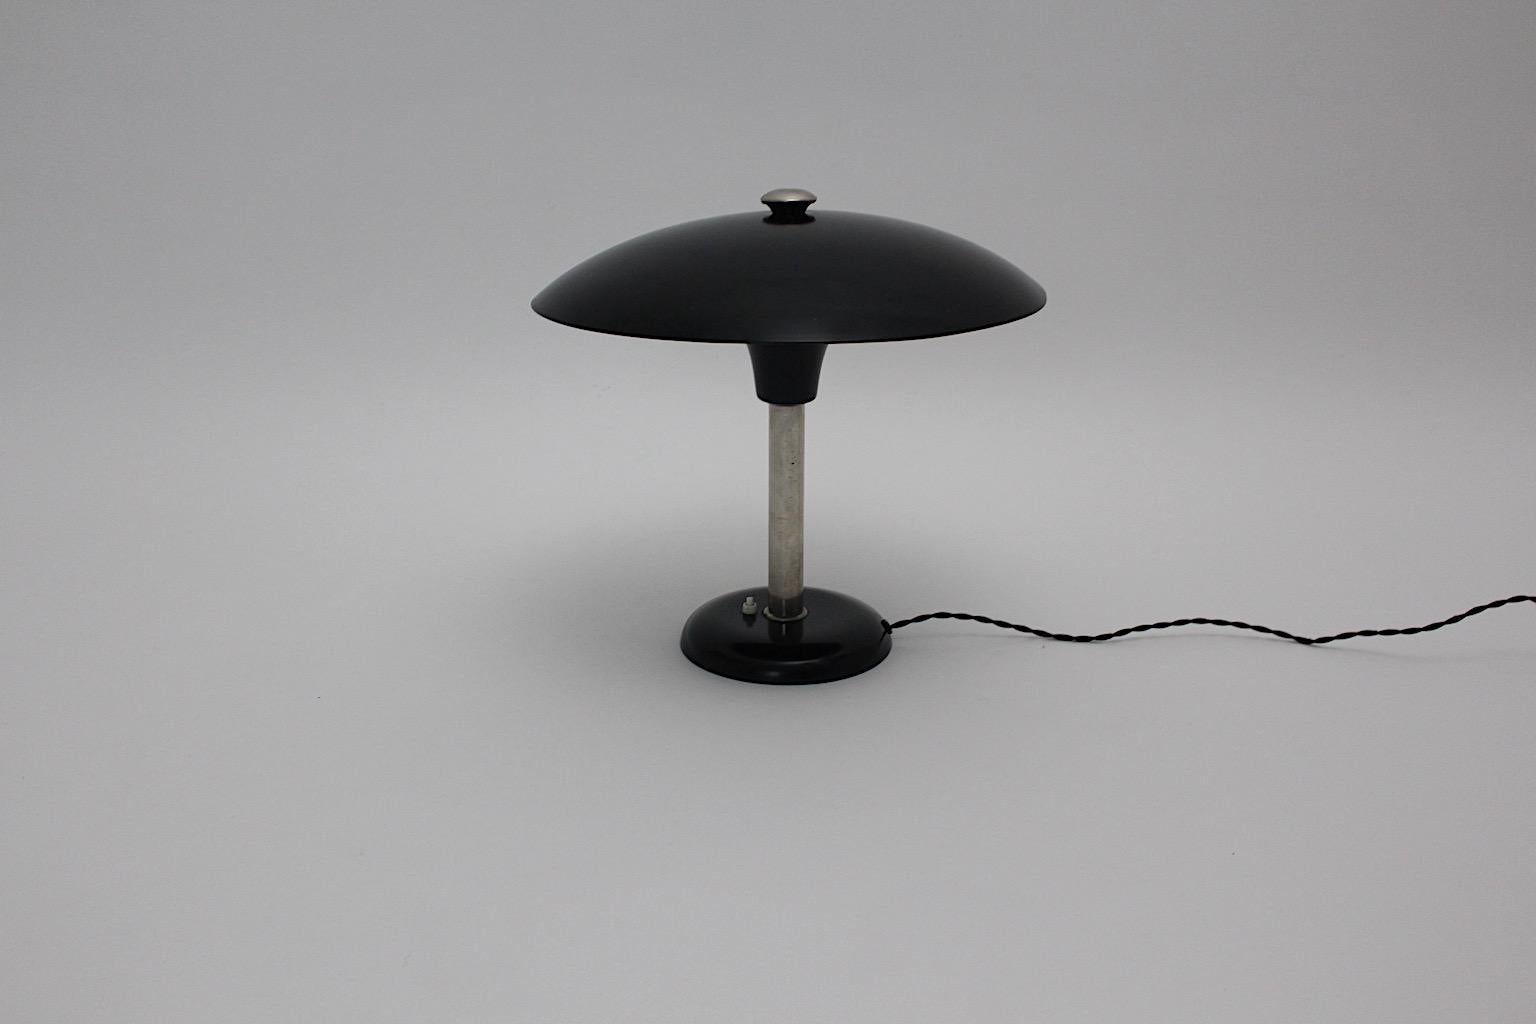 Art Deco Vintage Black Chrome Table Lamp Desk Lamp Max Schumacher, 1934, Germany In Good Condition For Sale In Vienna, AT